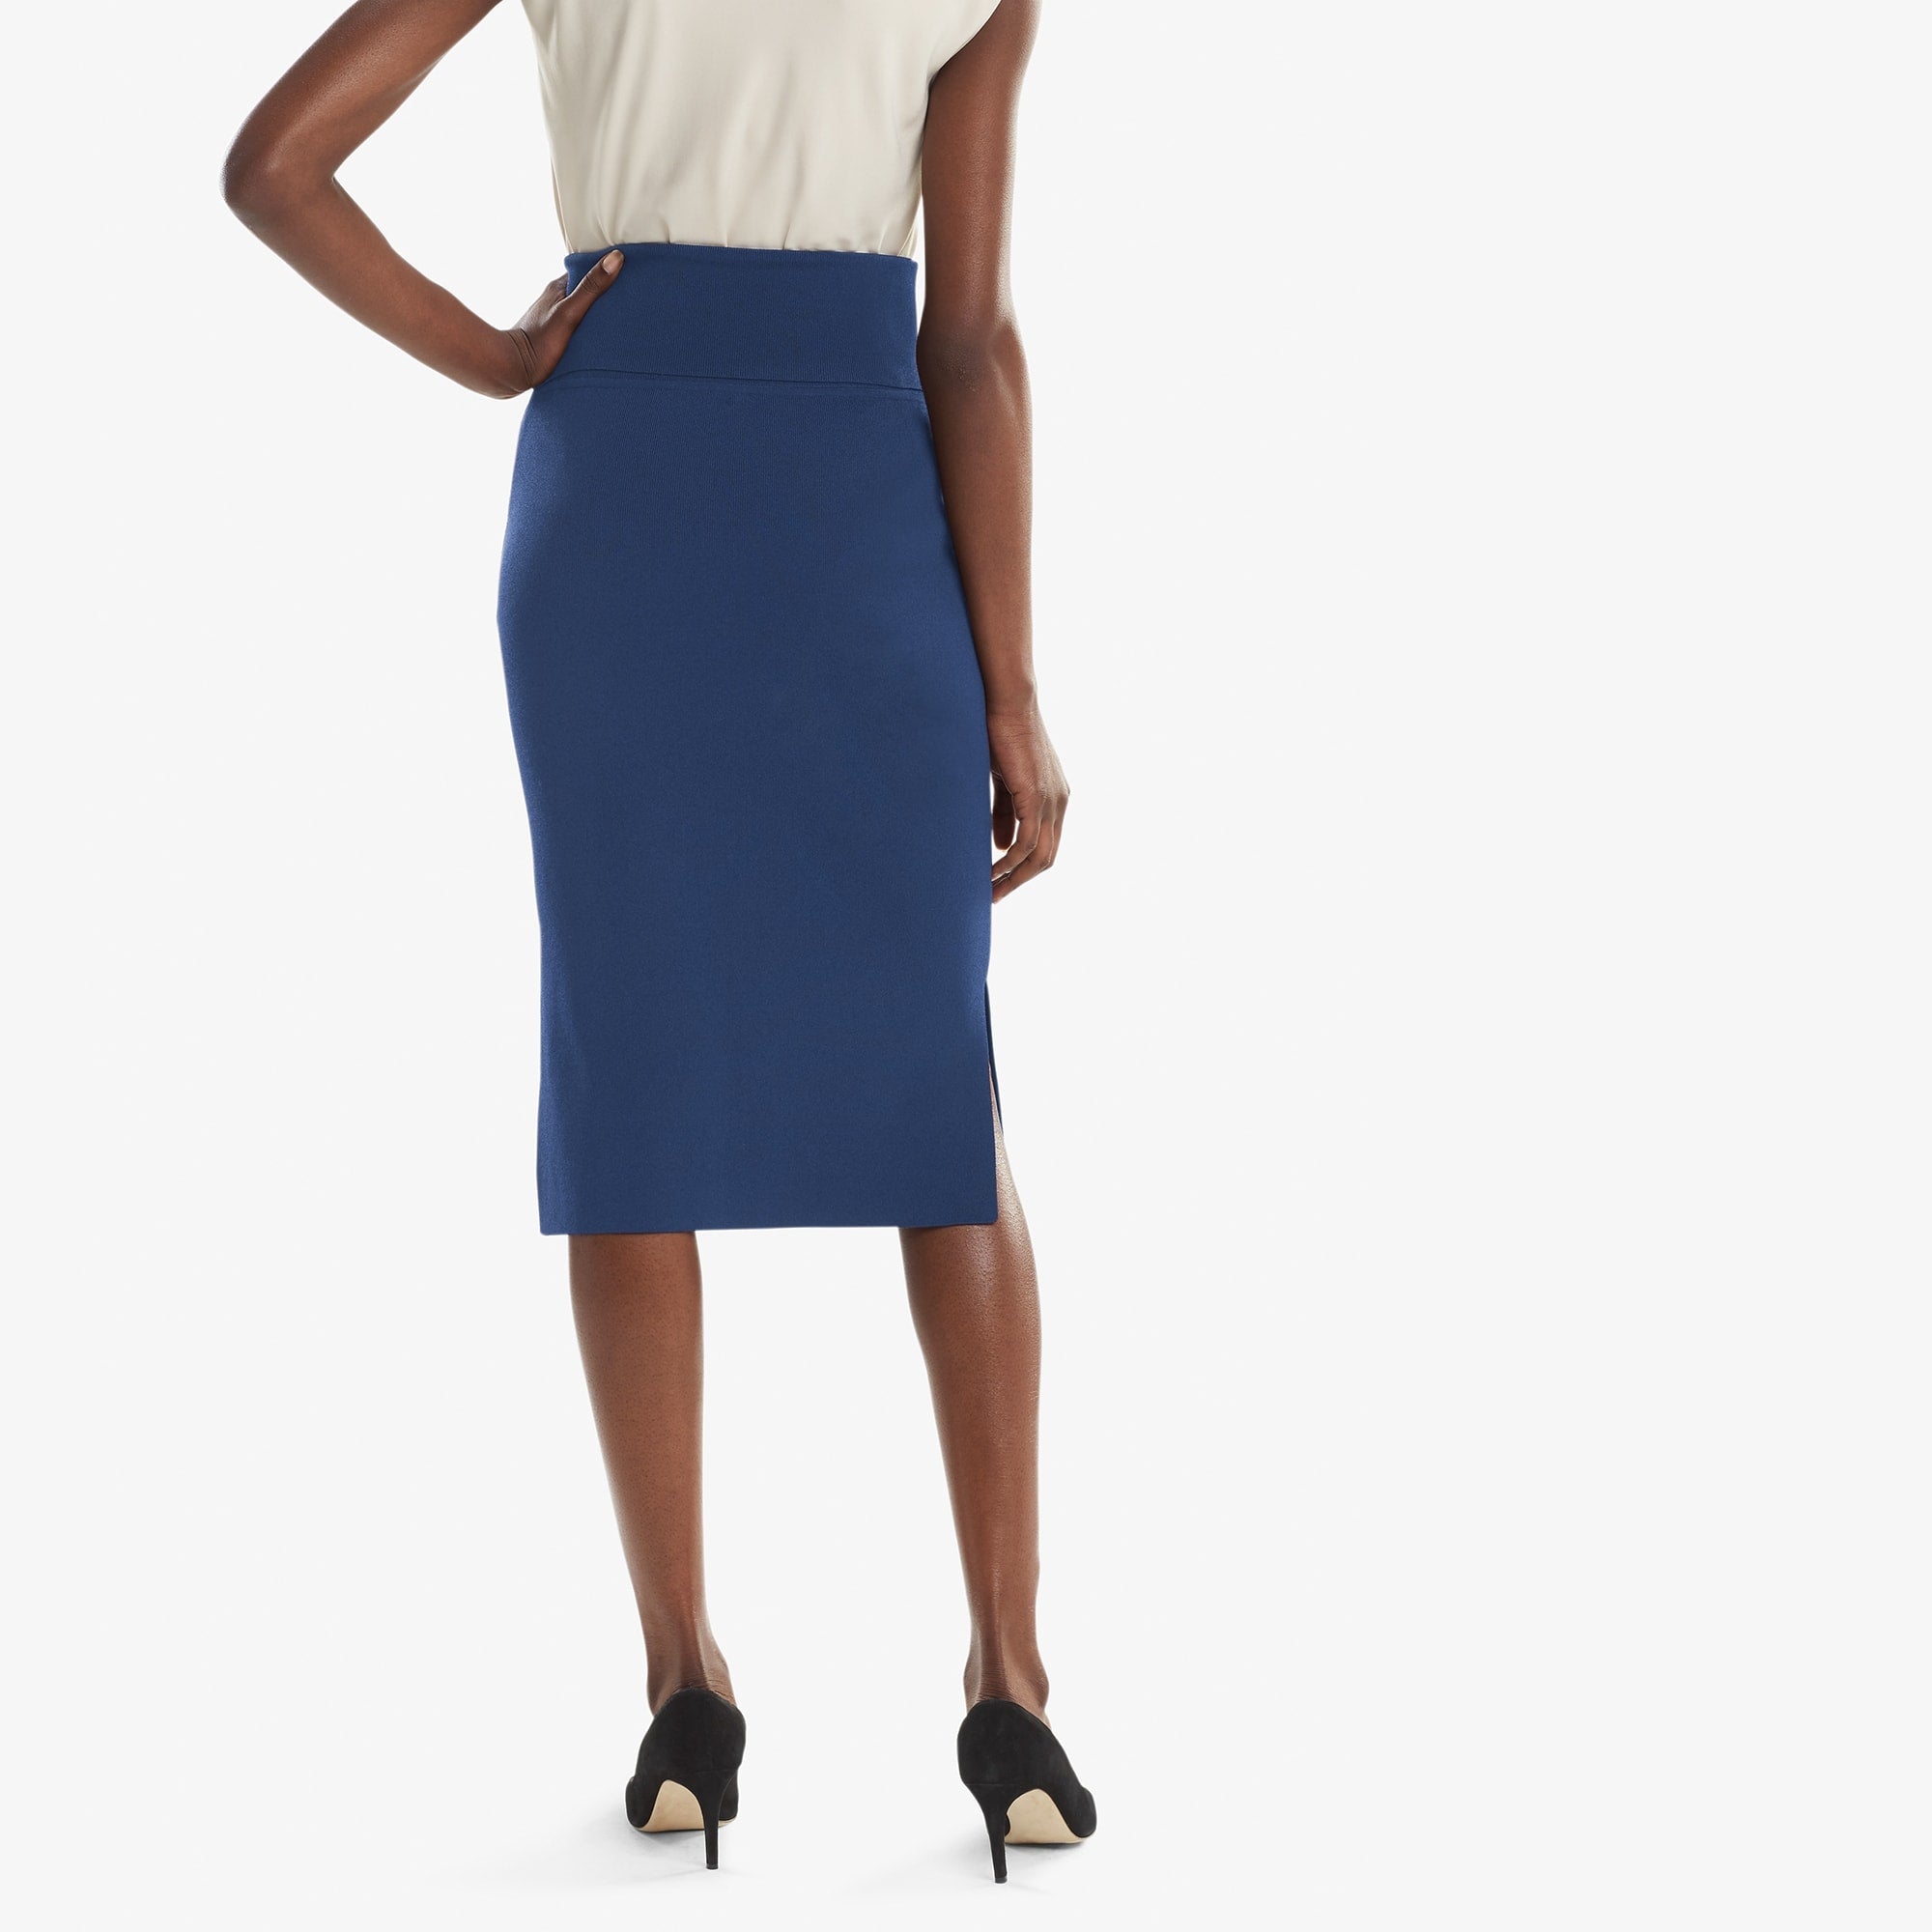 Back image of a woman standing wearing the Harlem skirt in Regent blue